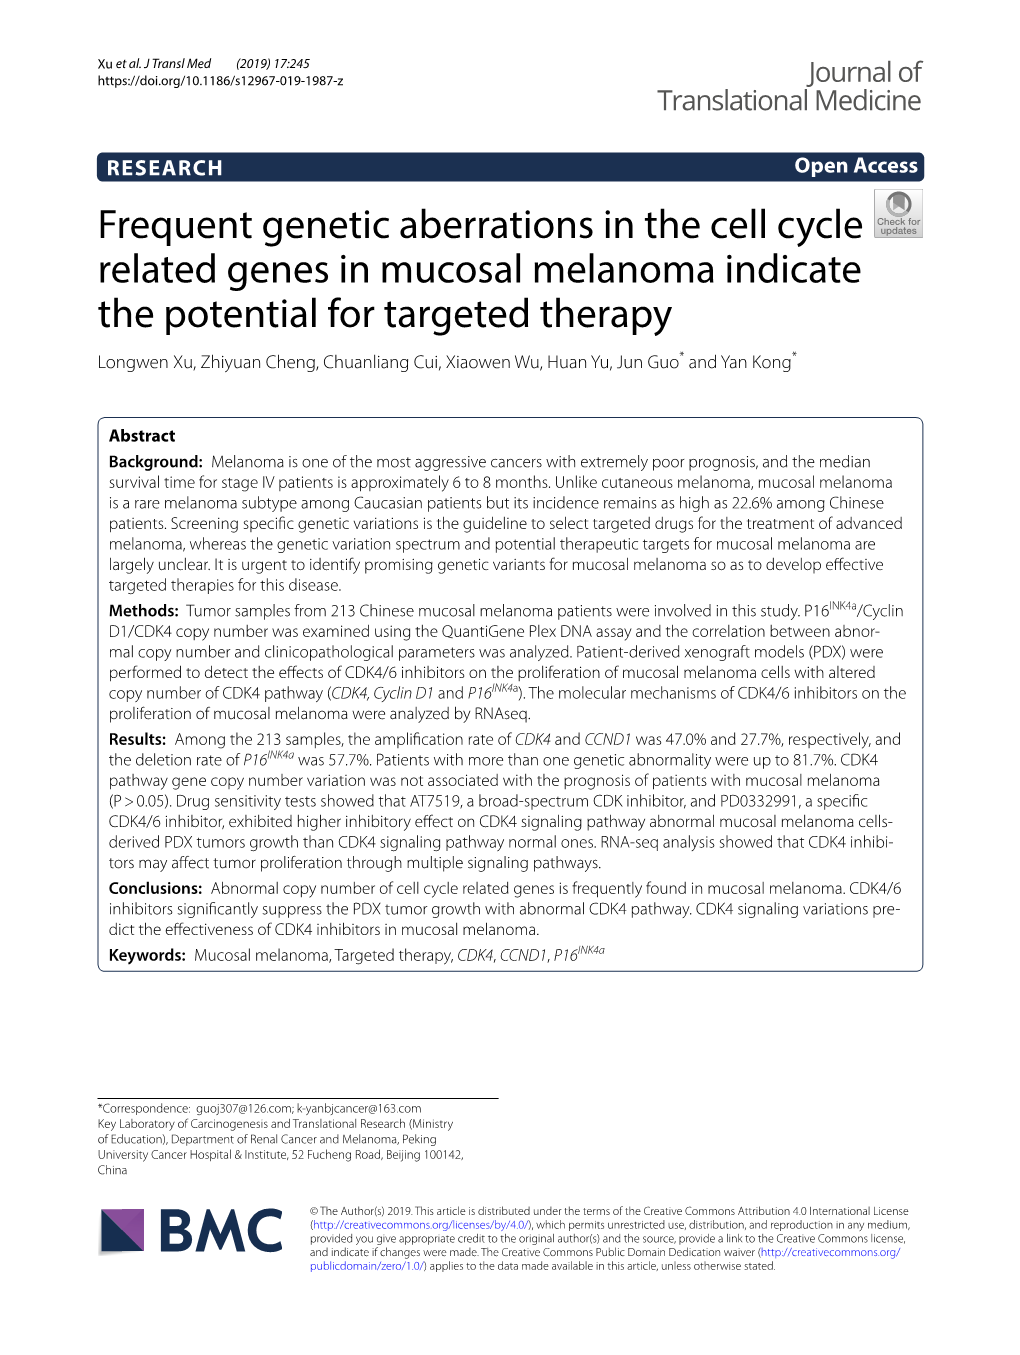 Frequent Genetic Aberrations in the Cell Cycle Related Genes in Mucosal